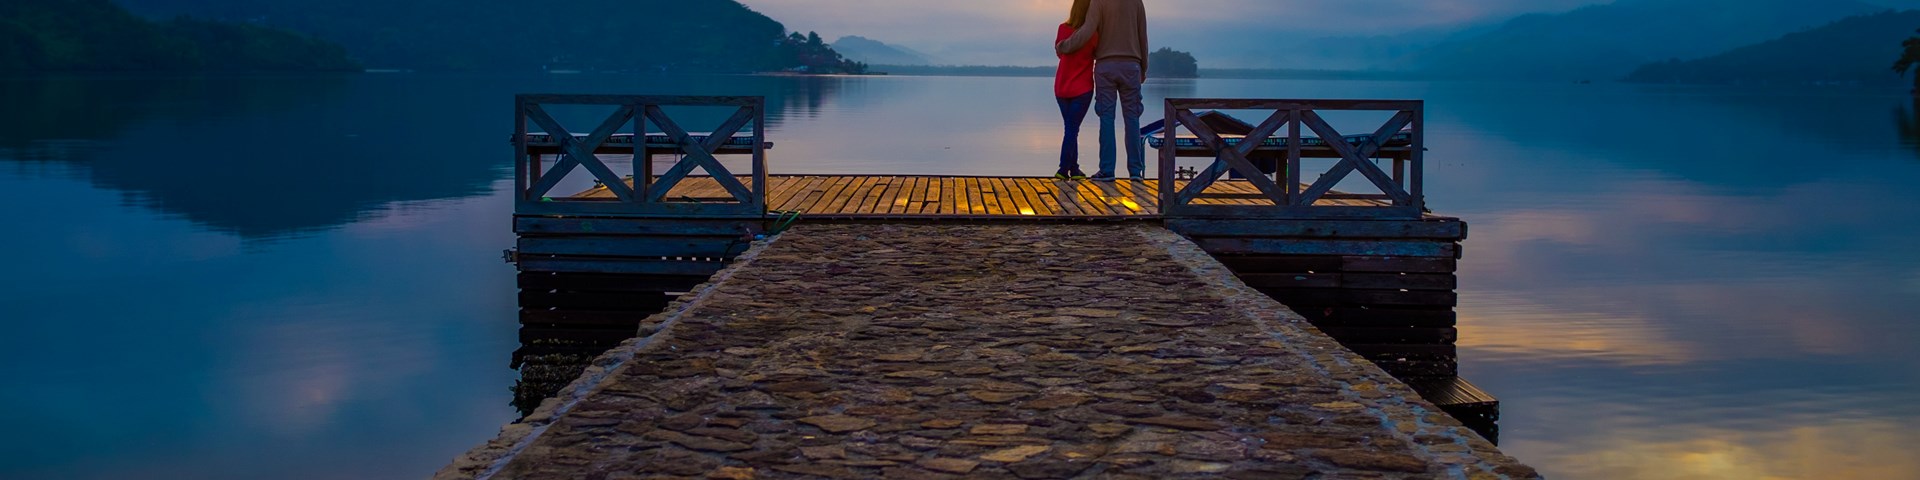 A couple relaxing in front of a lake